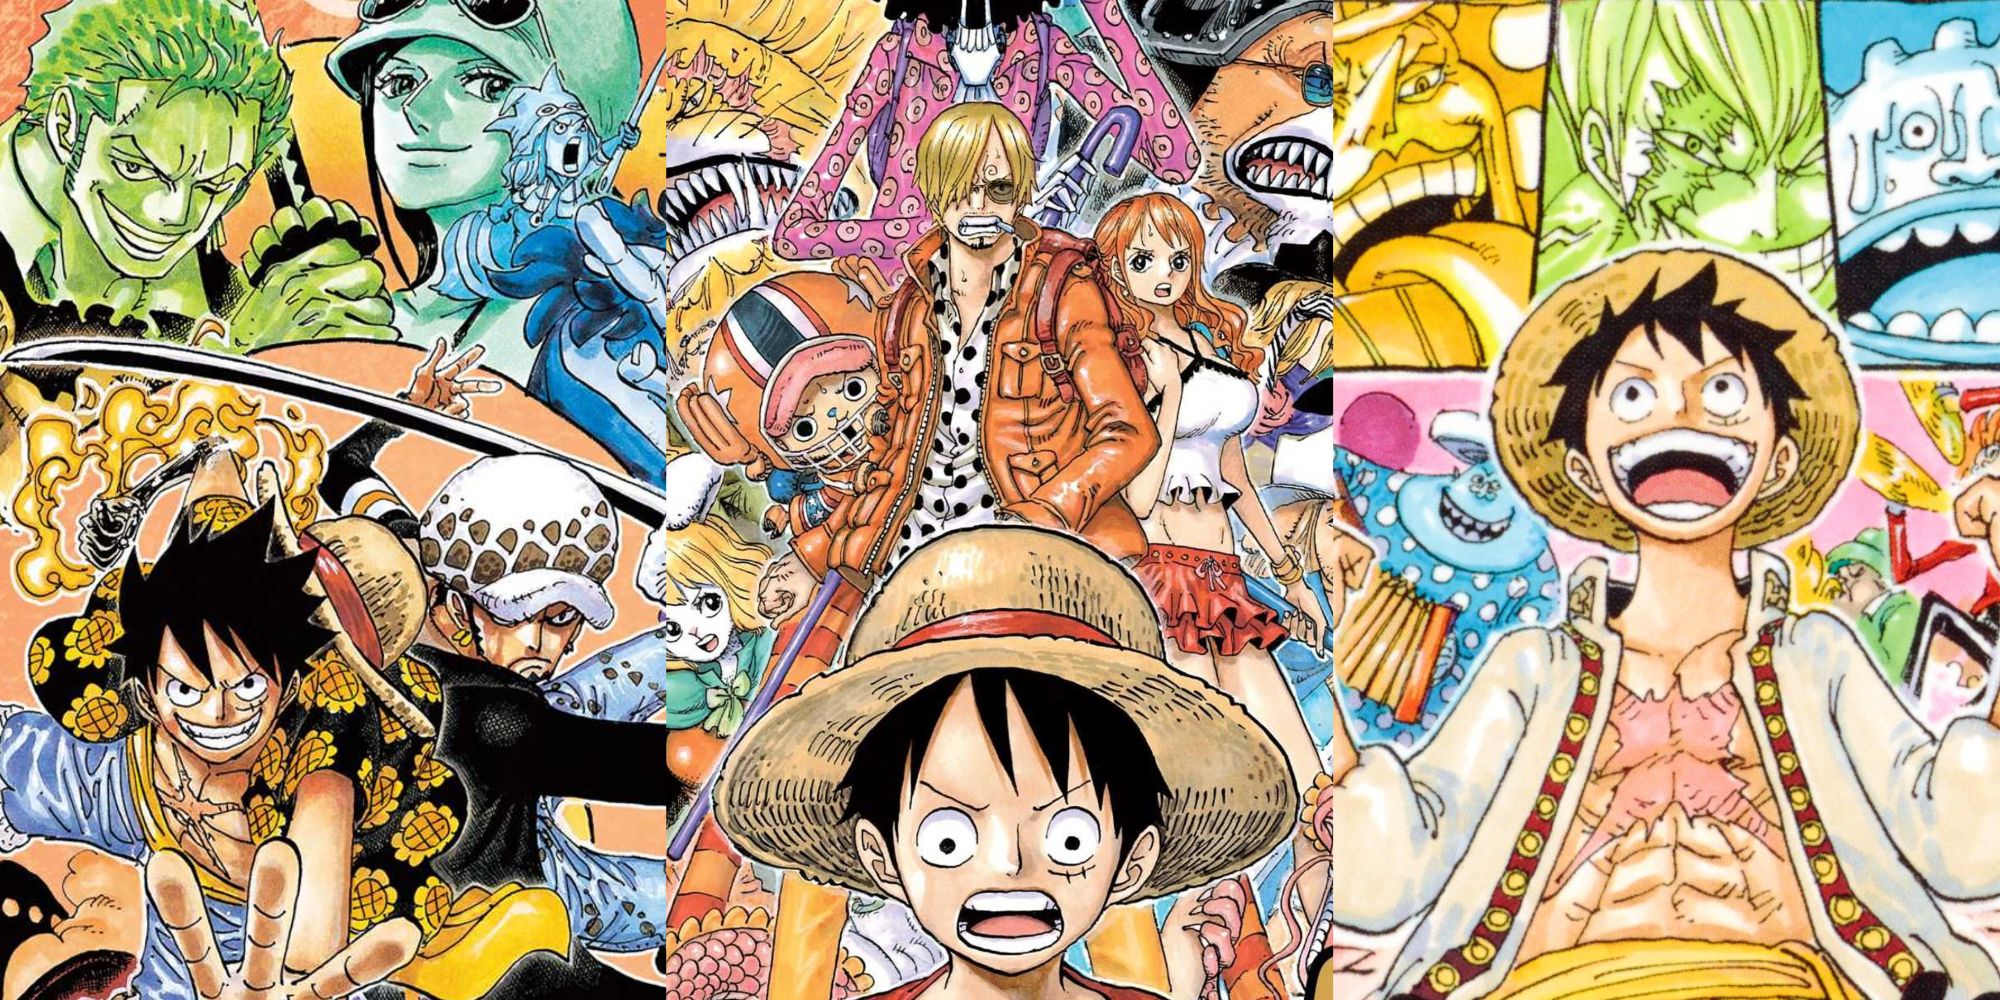 one piece dressrossa, zou, and whole cake island arc manga covers with luffy and other important characters